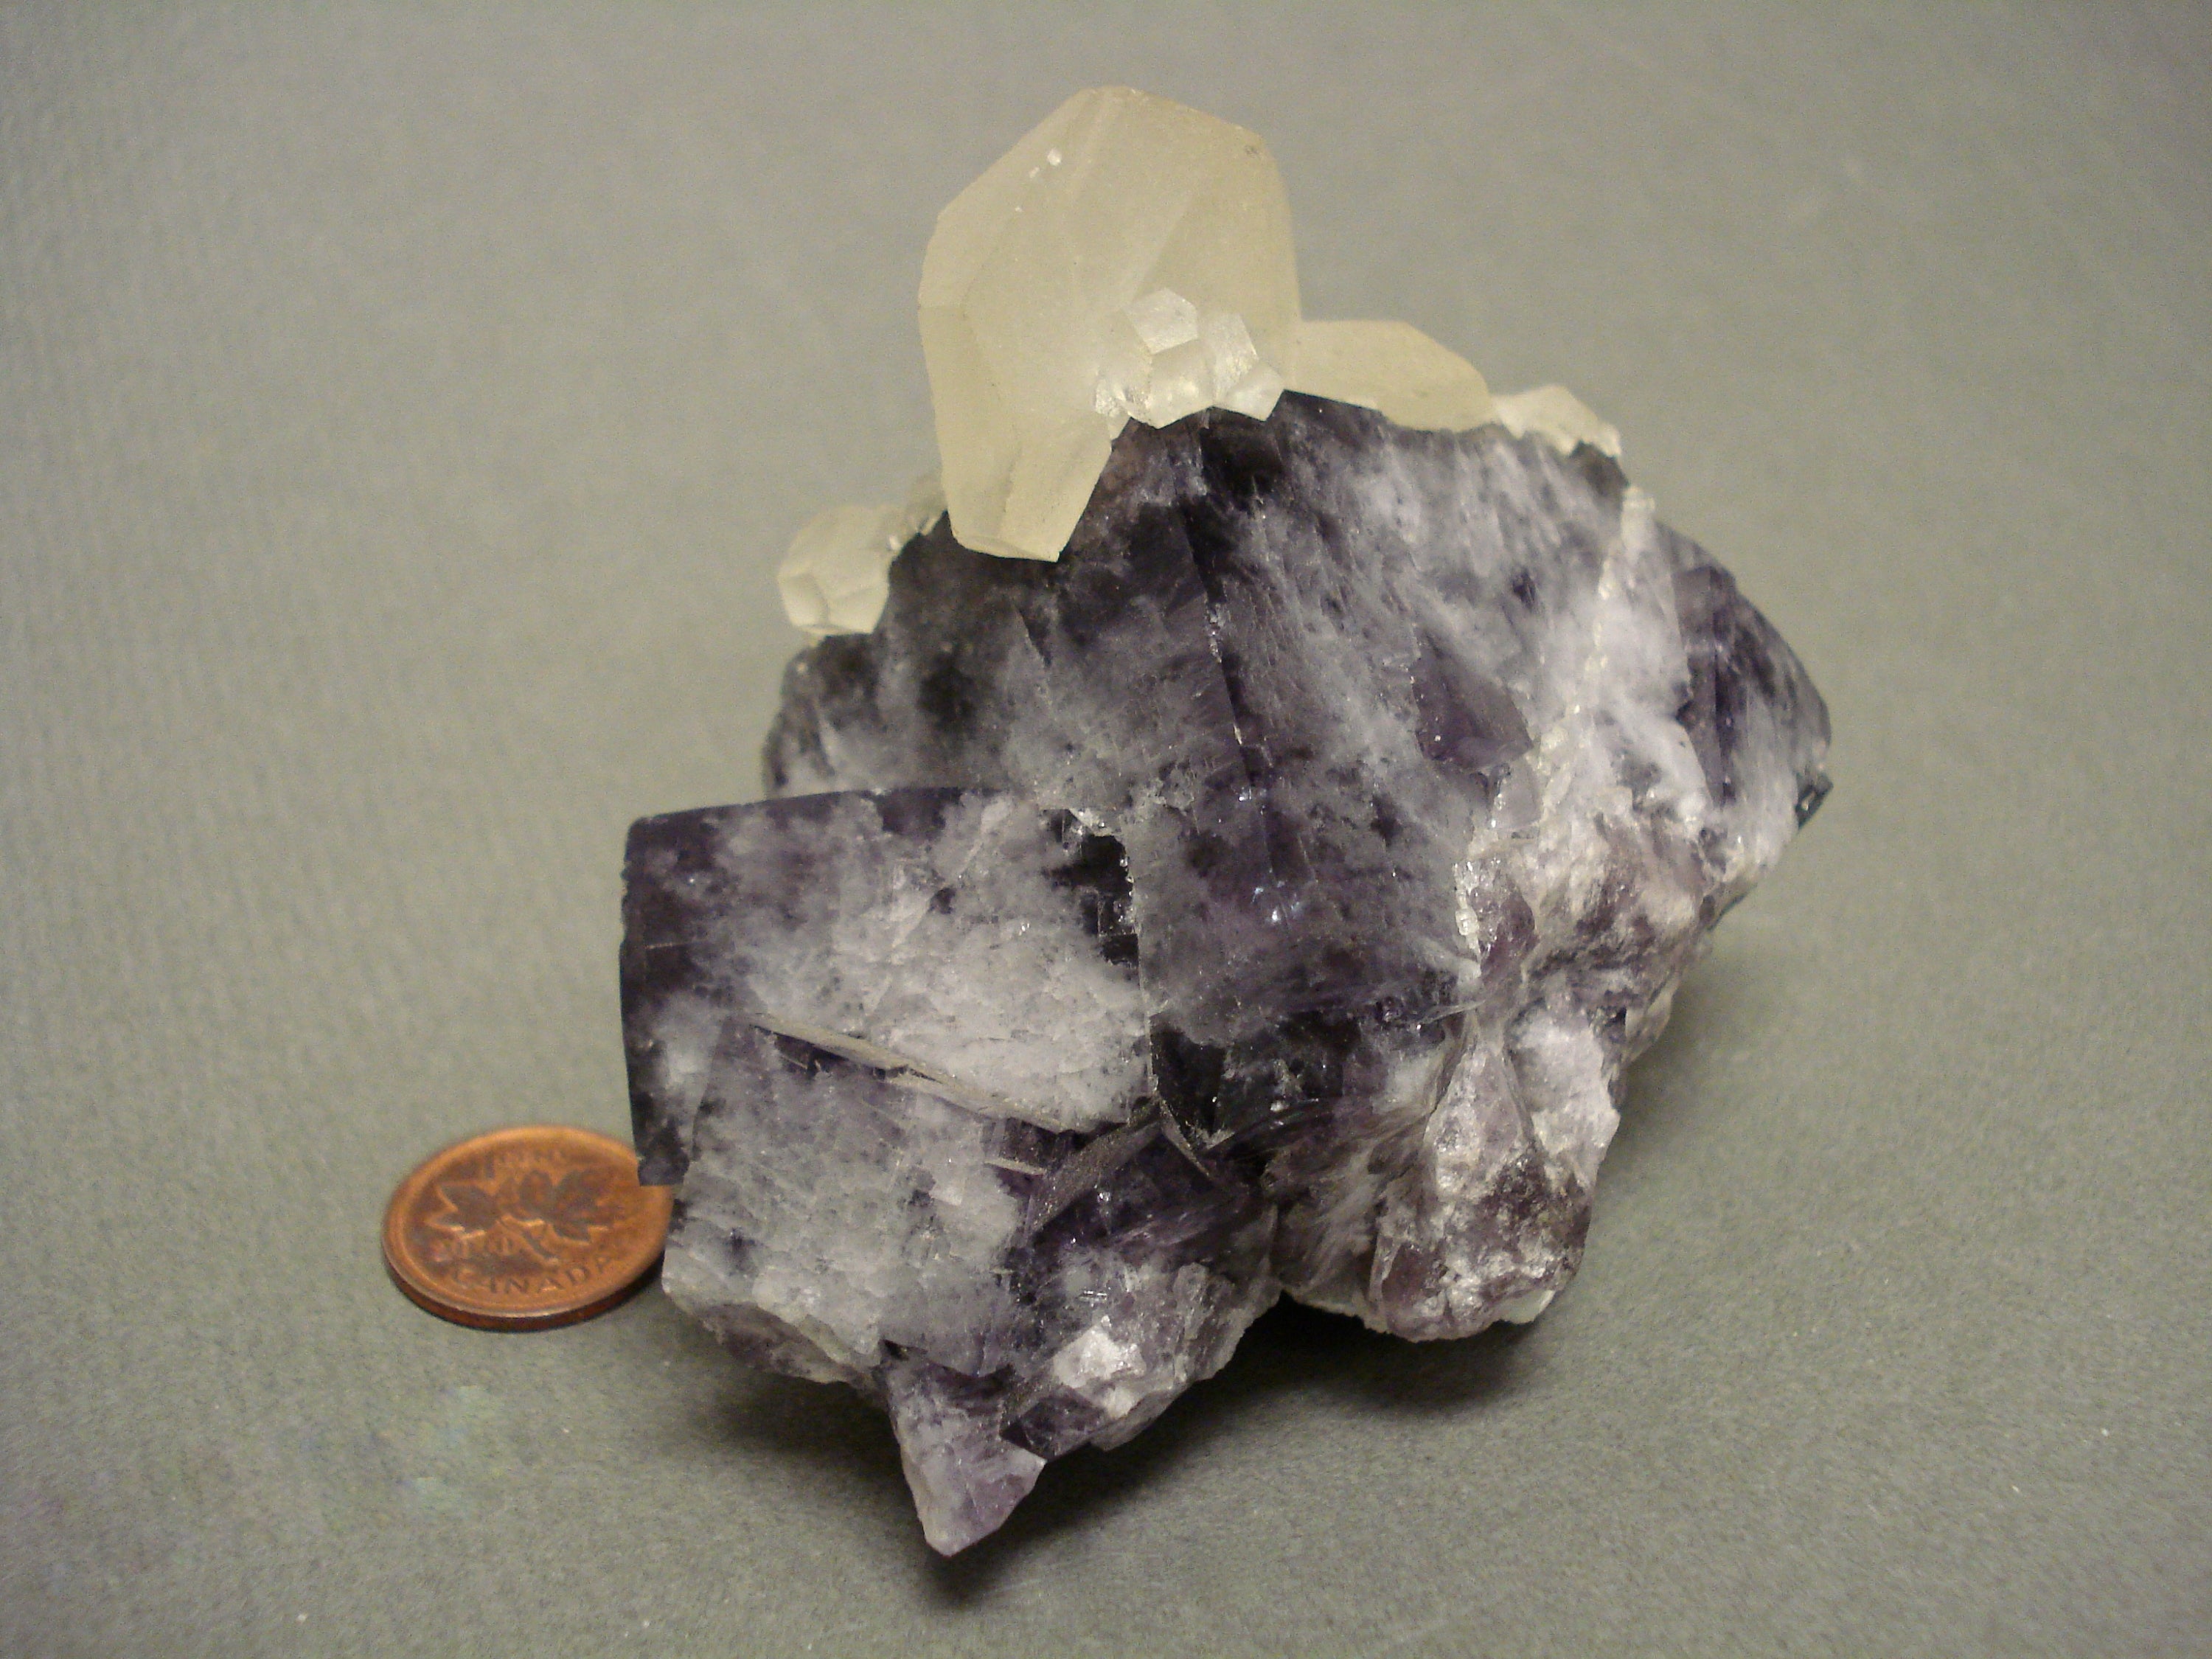 Poker Chip Calcite on Fluorite next to a penny for size comparison